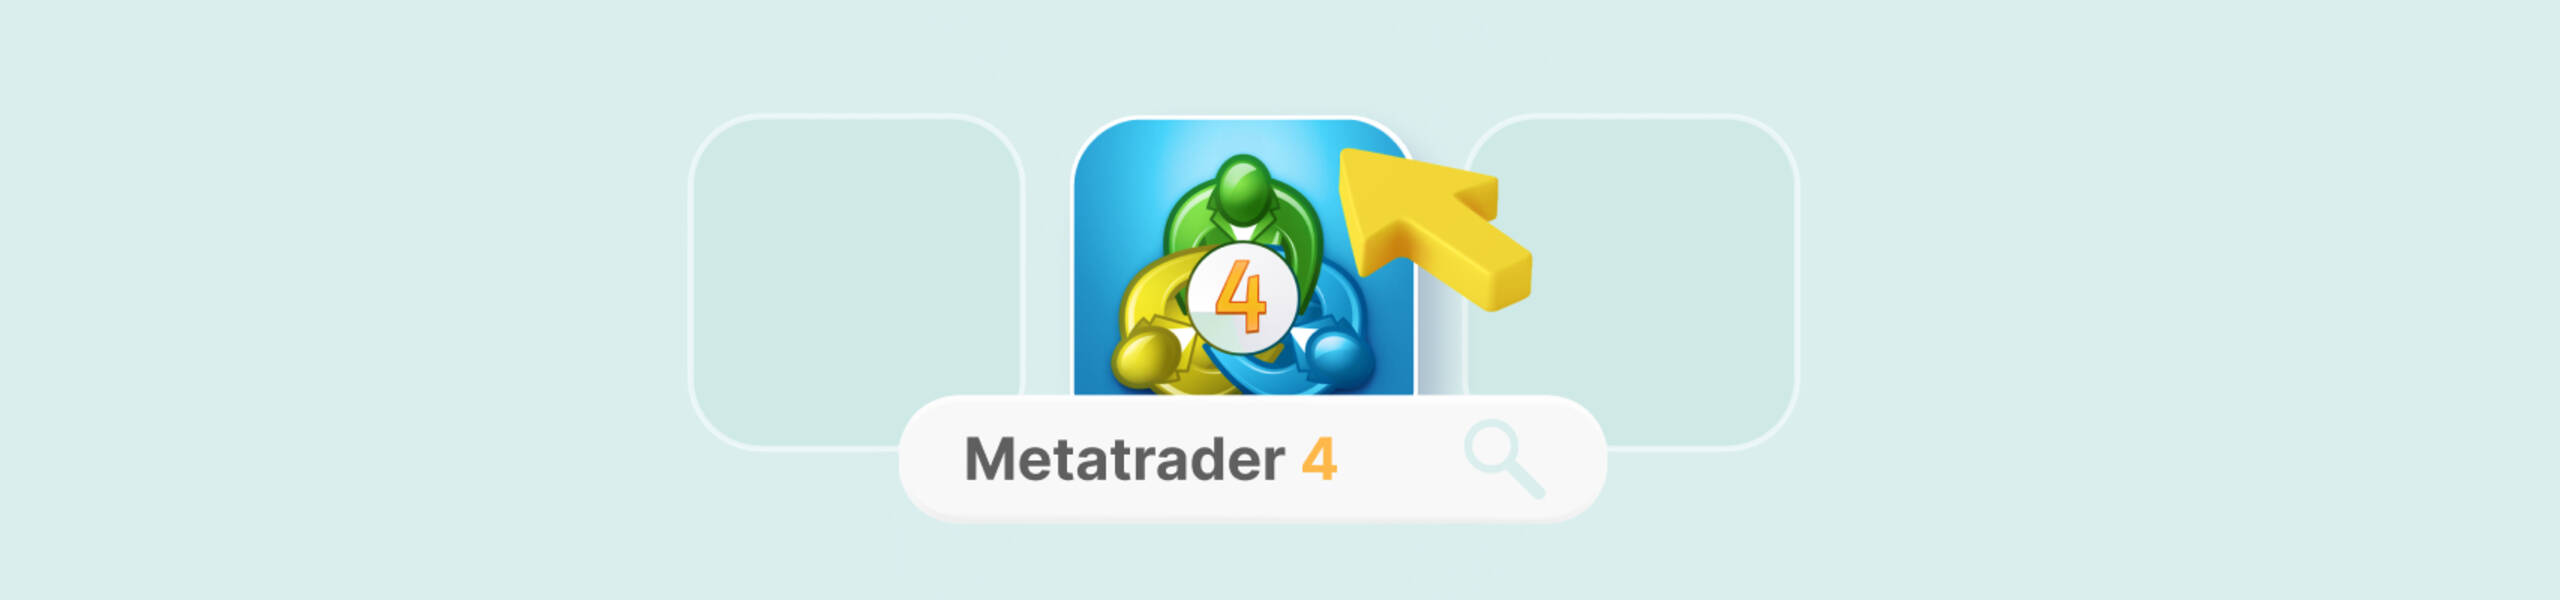 How to Use MetaTrader 4: A Guide for Beginners